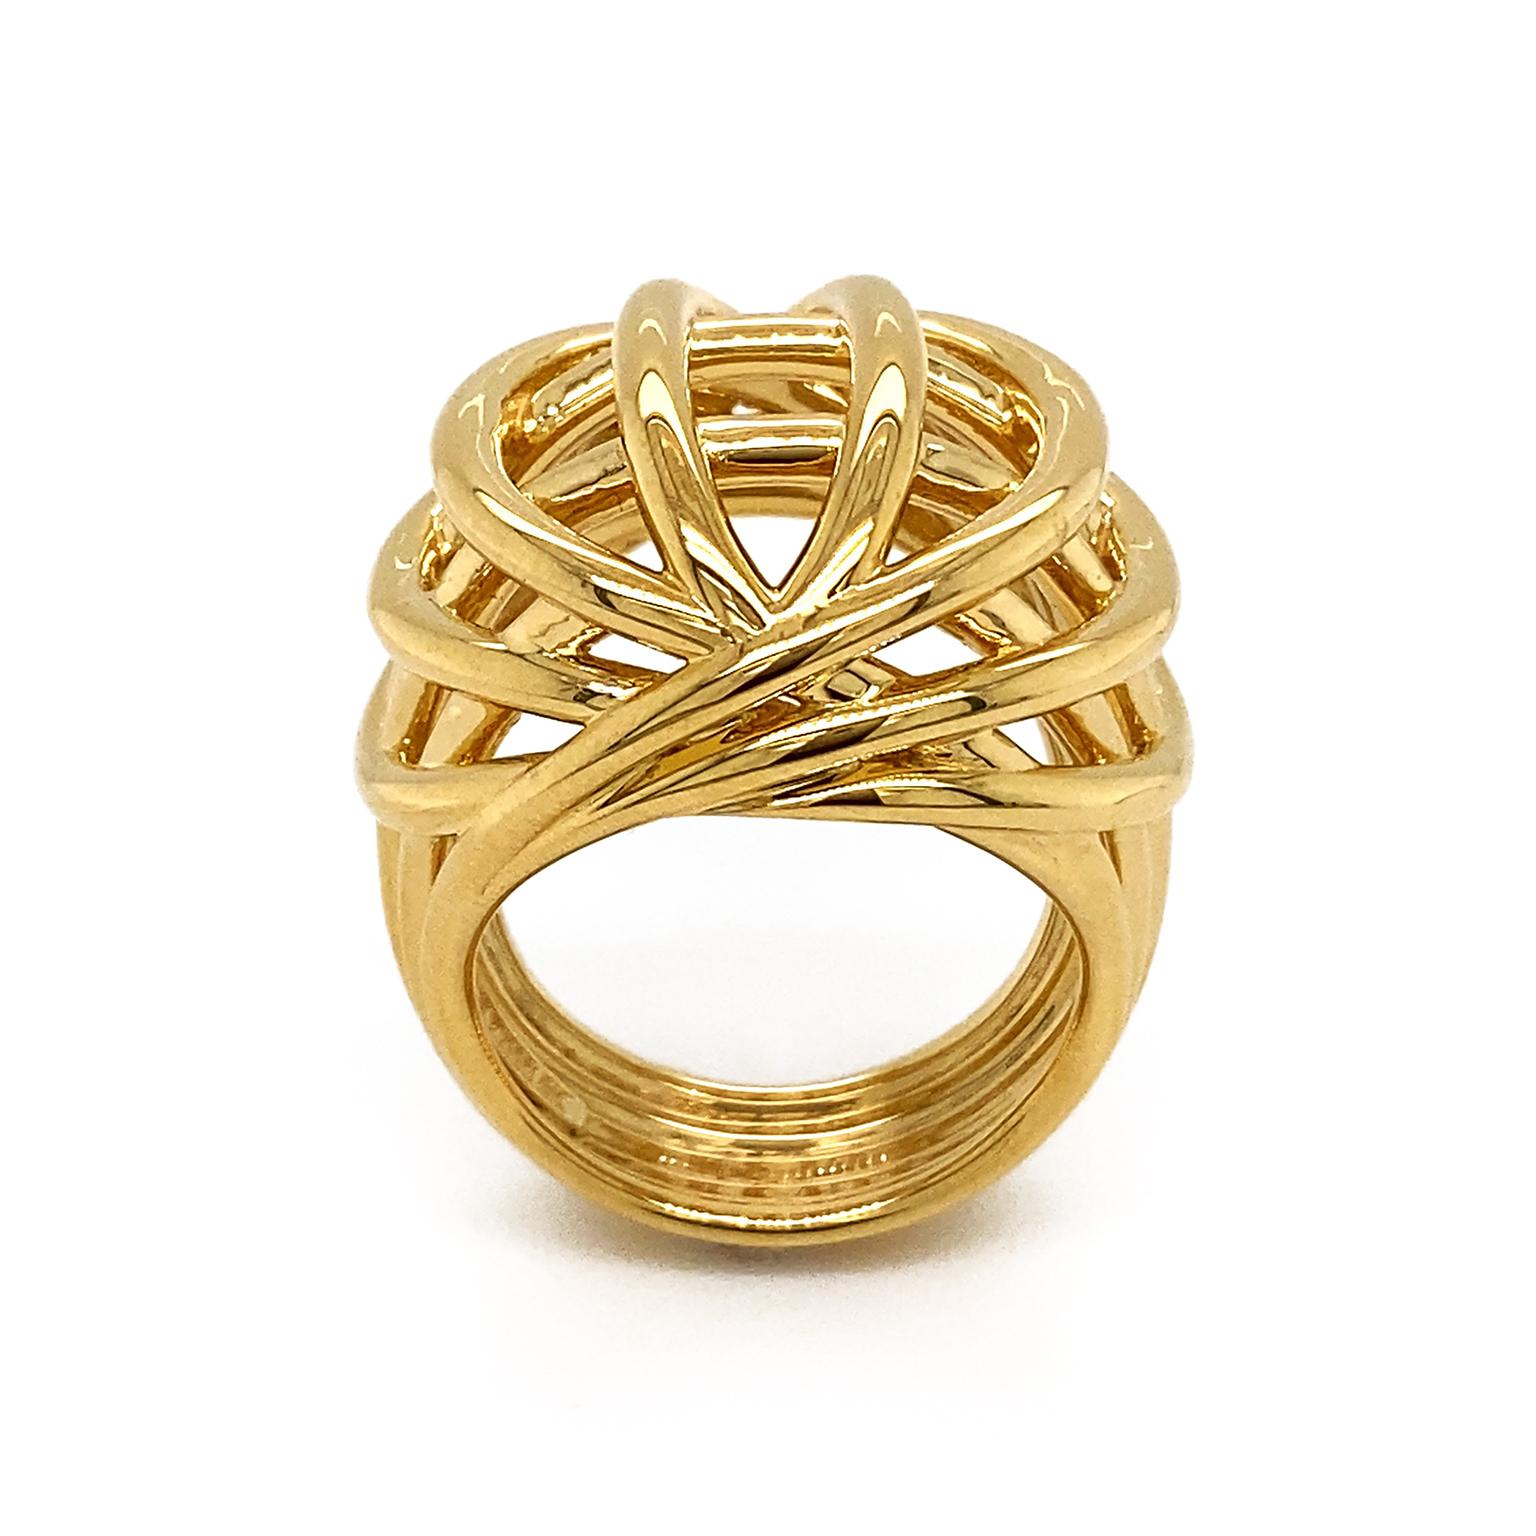 Intricacy with the vivid metal of 18k yellow gold creates a memorable motif. A multi-split band ascends on both sides and intertwines throughout. The finished result is a voluminous openwork design.